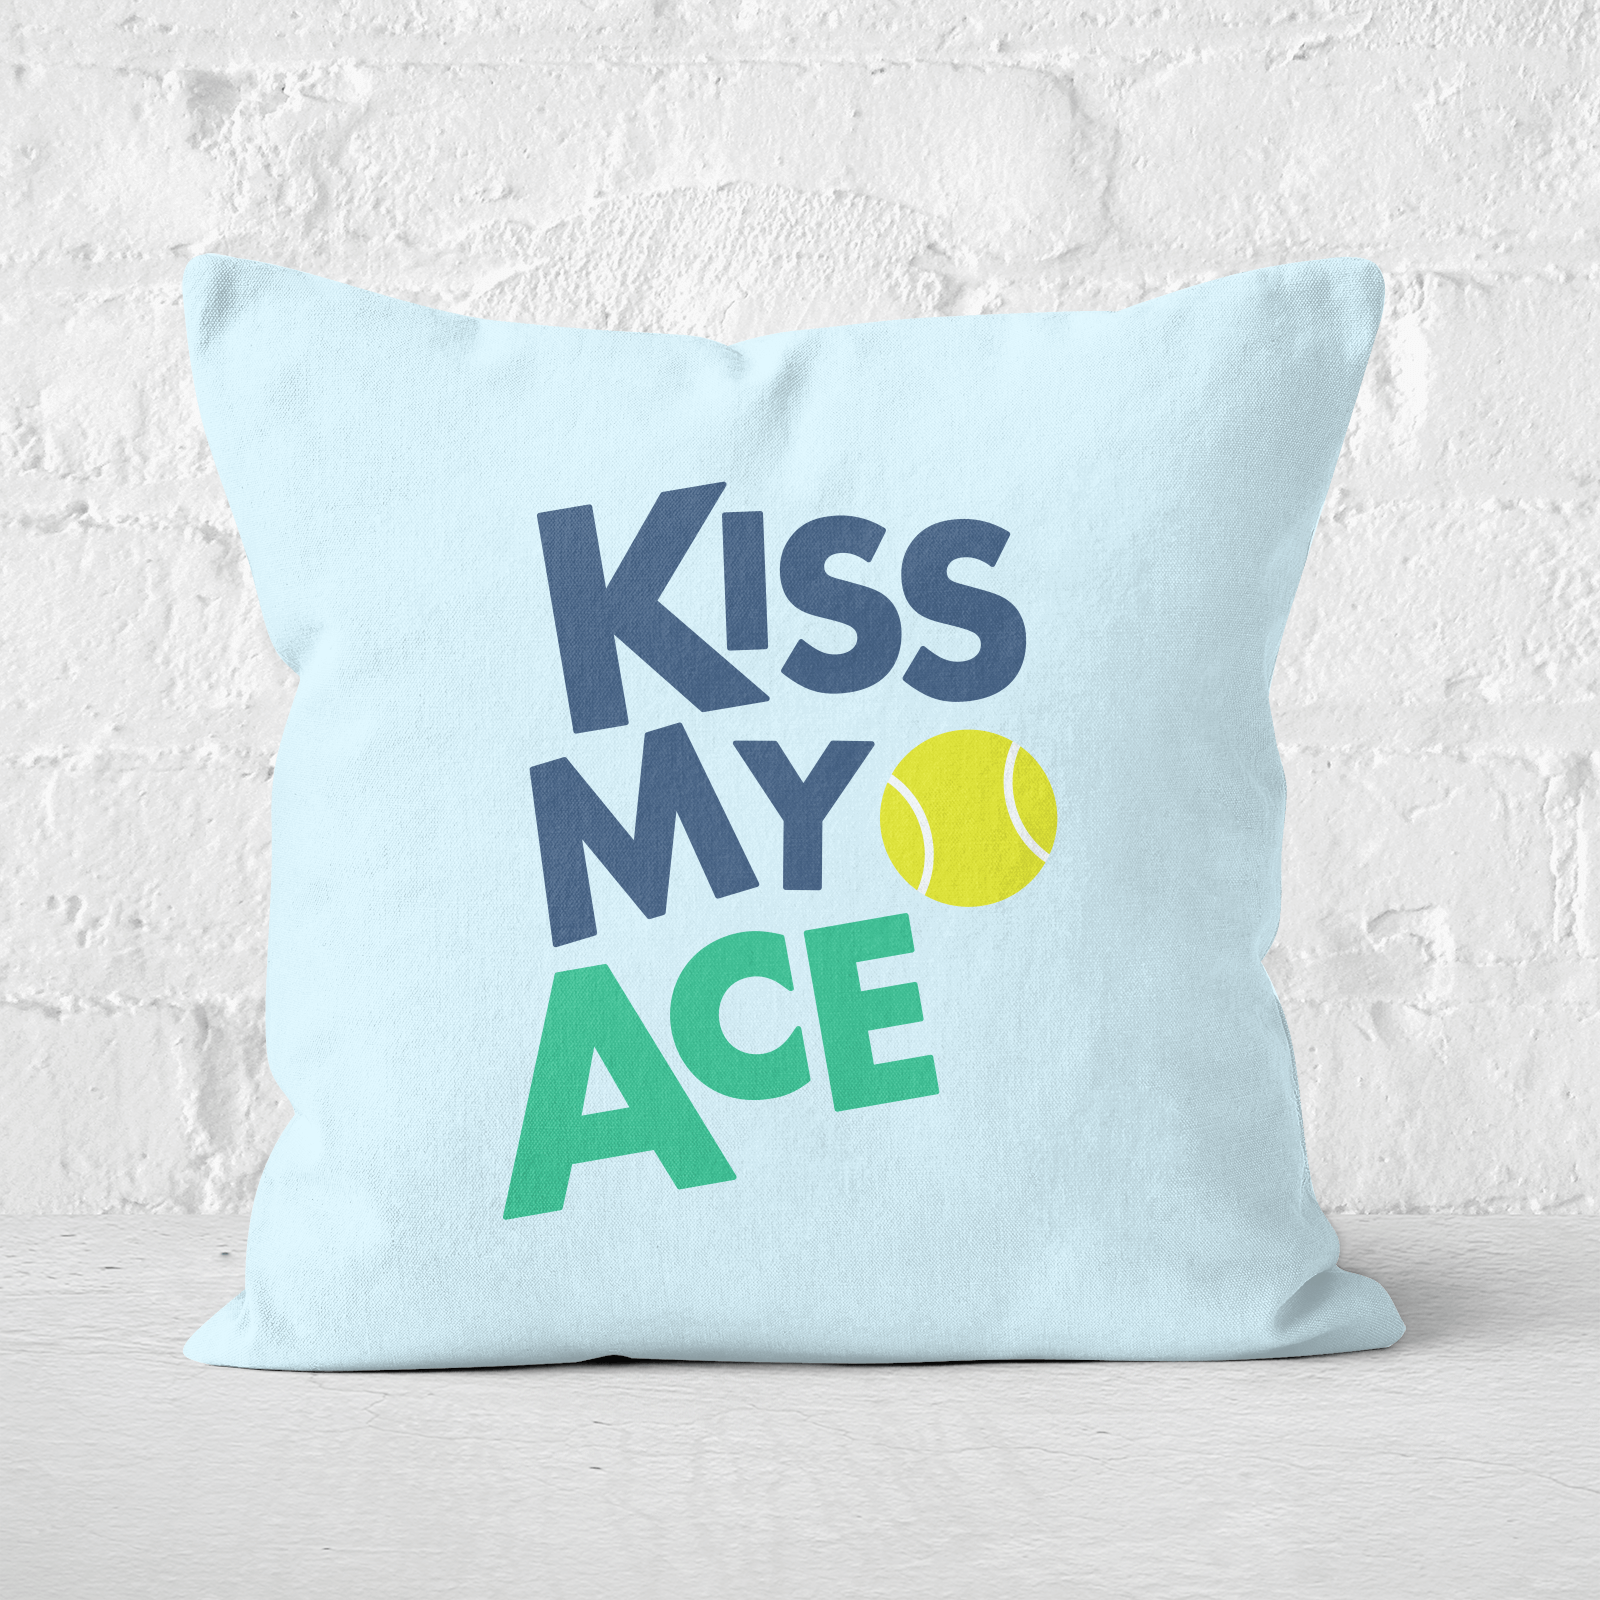 Kiss My Ace Square Cushion   50x50cm   Soft Touch